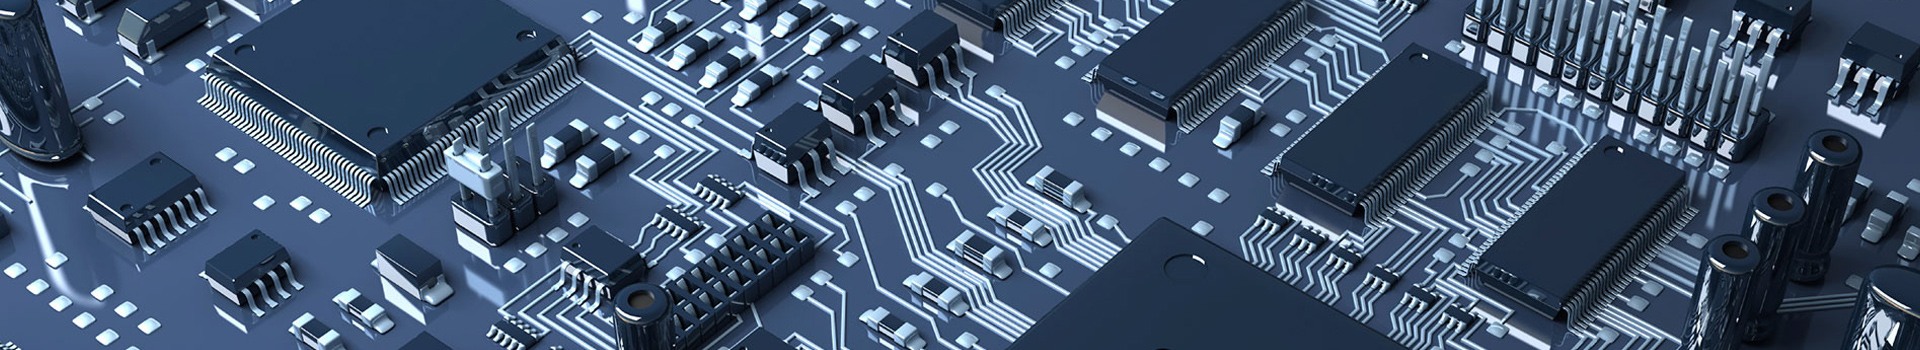 PCB Electronic Components and pcb design